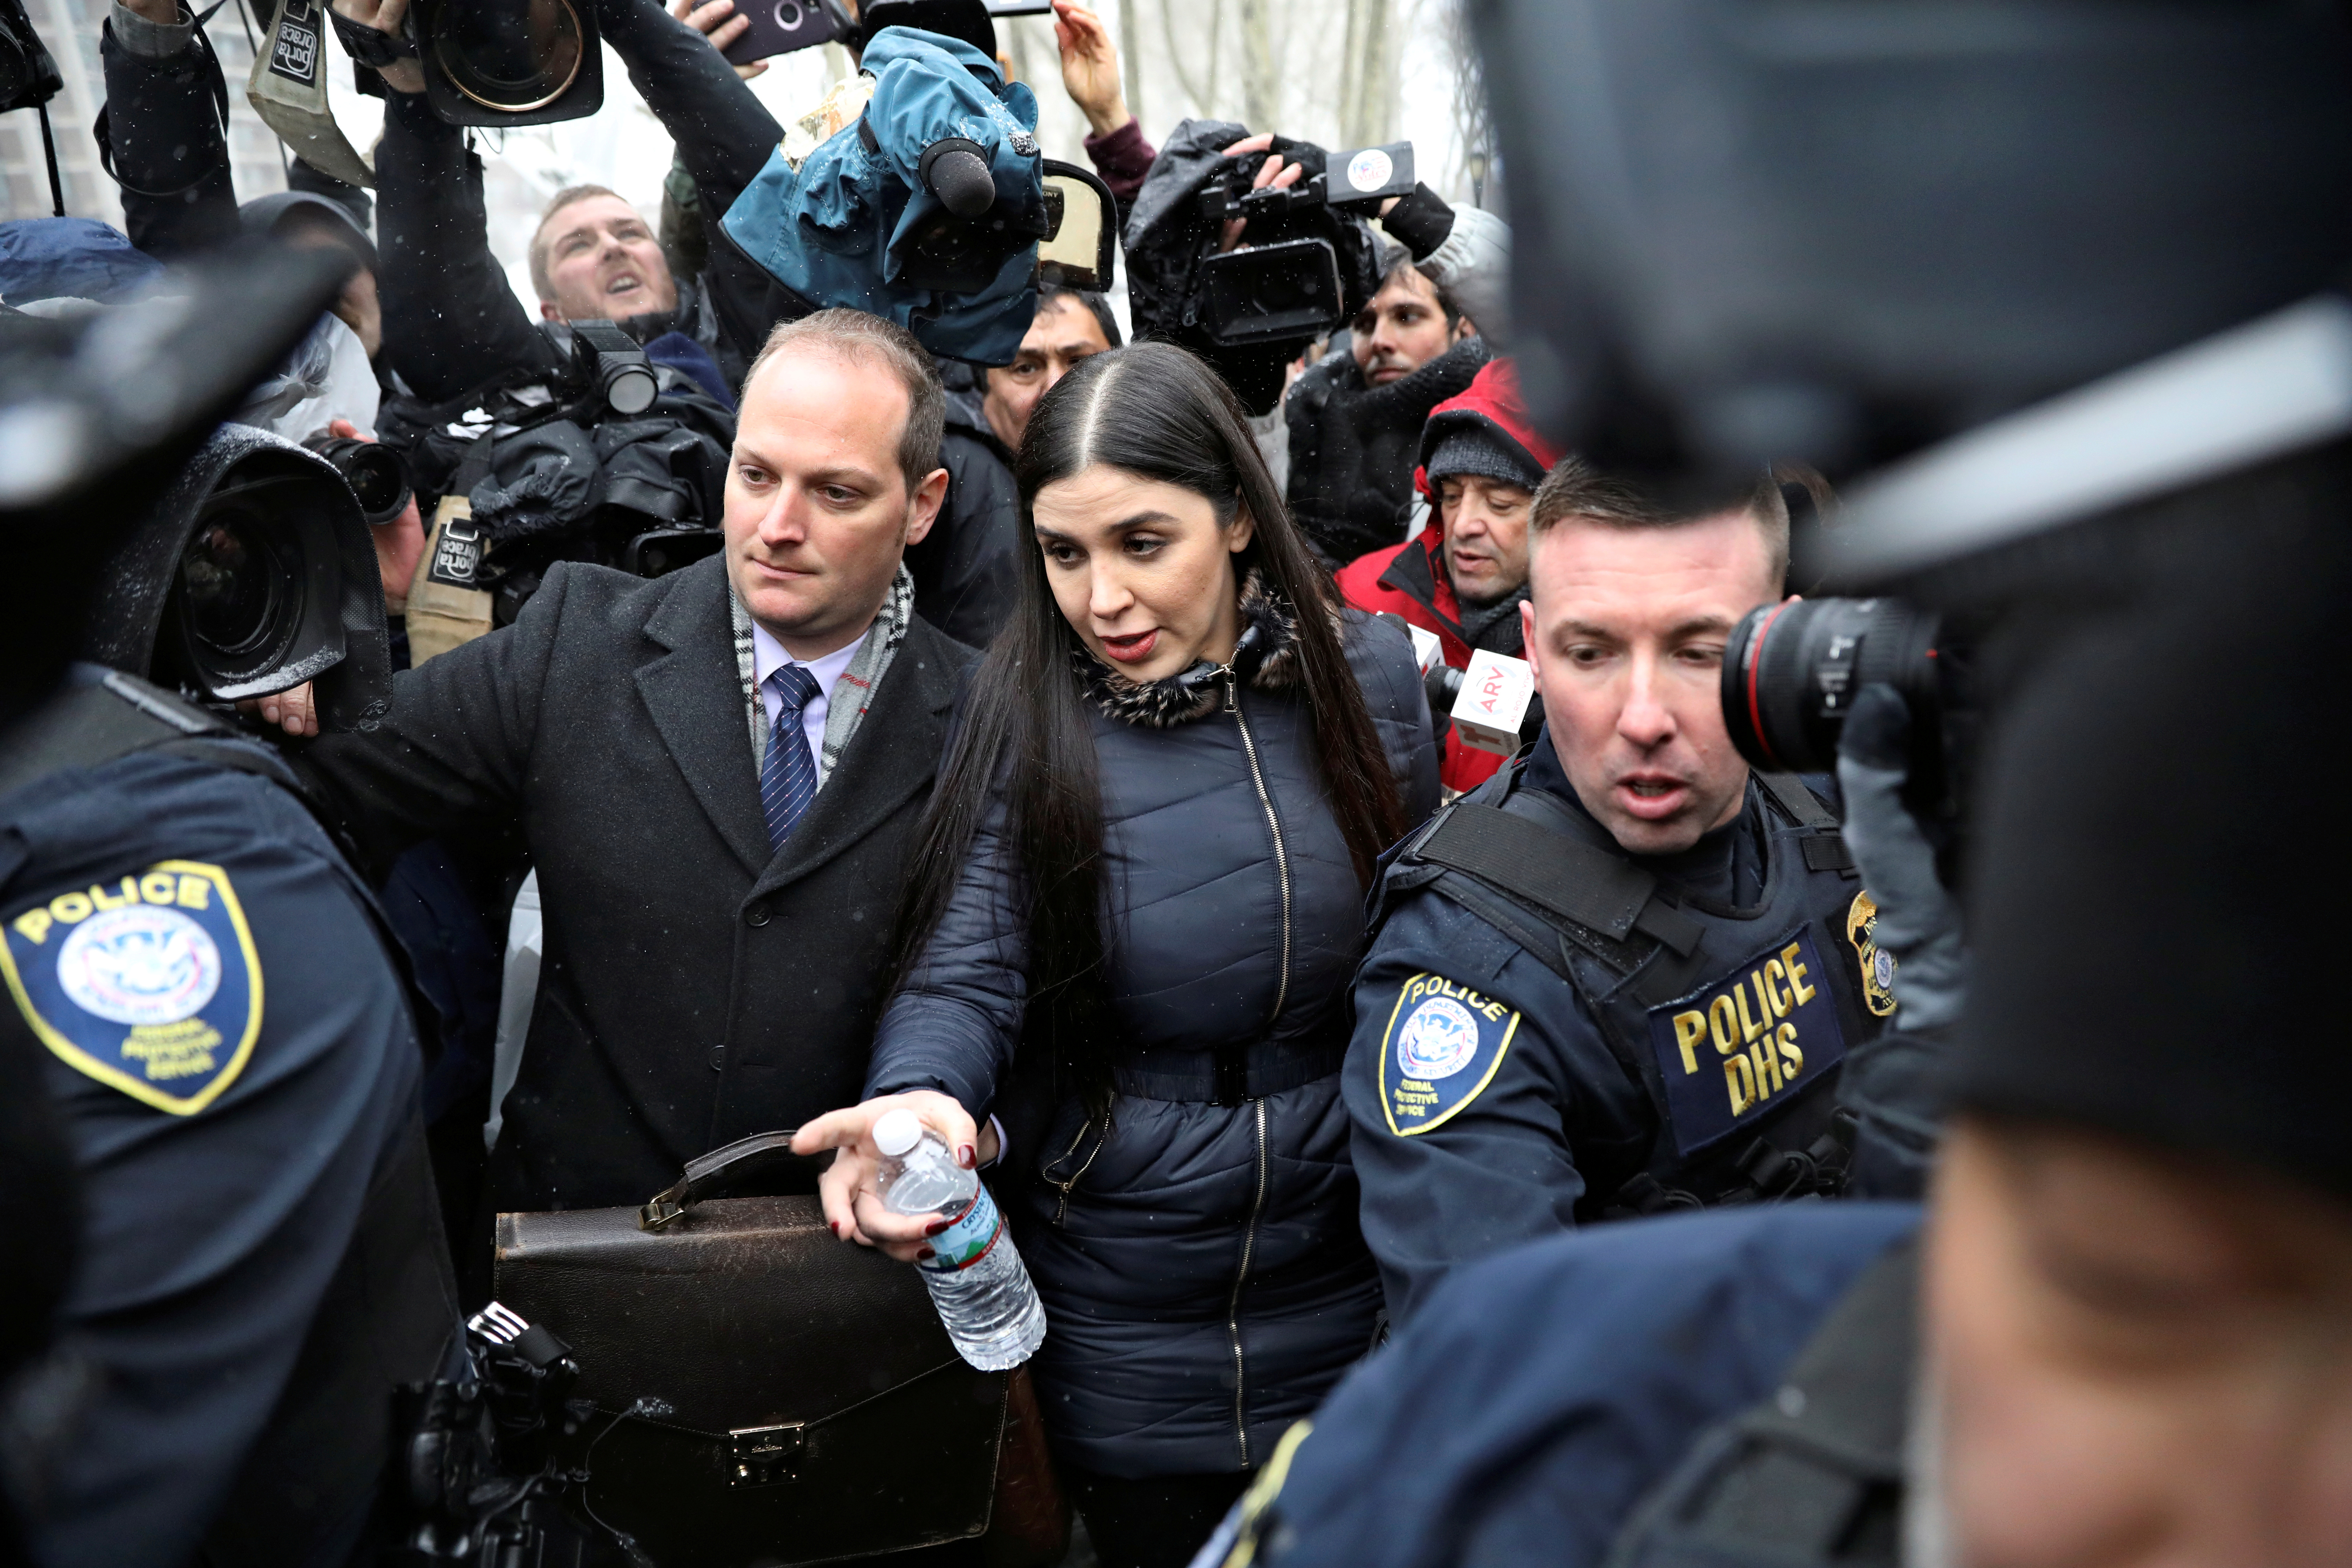 Emma Coronel Aispuro, the wife of Joaquin Guzman, departs after the trial of Mexican drug lord Guzman, known as "El Chapo", at the Brooklyn Federal Courthouse, in New York, U.S., February 12, 2019. REUTERS/Brendan McDermid